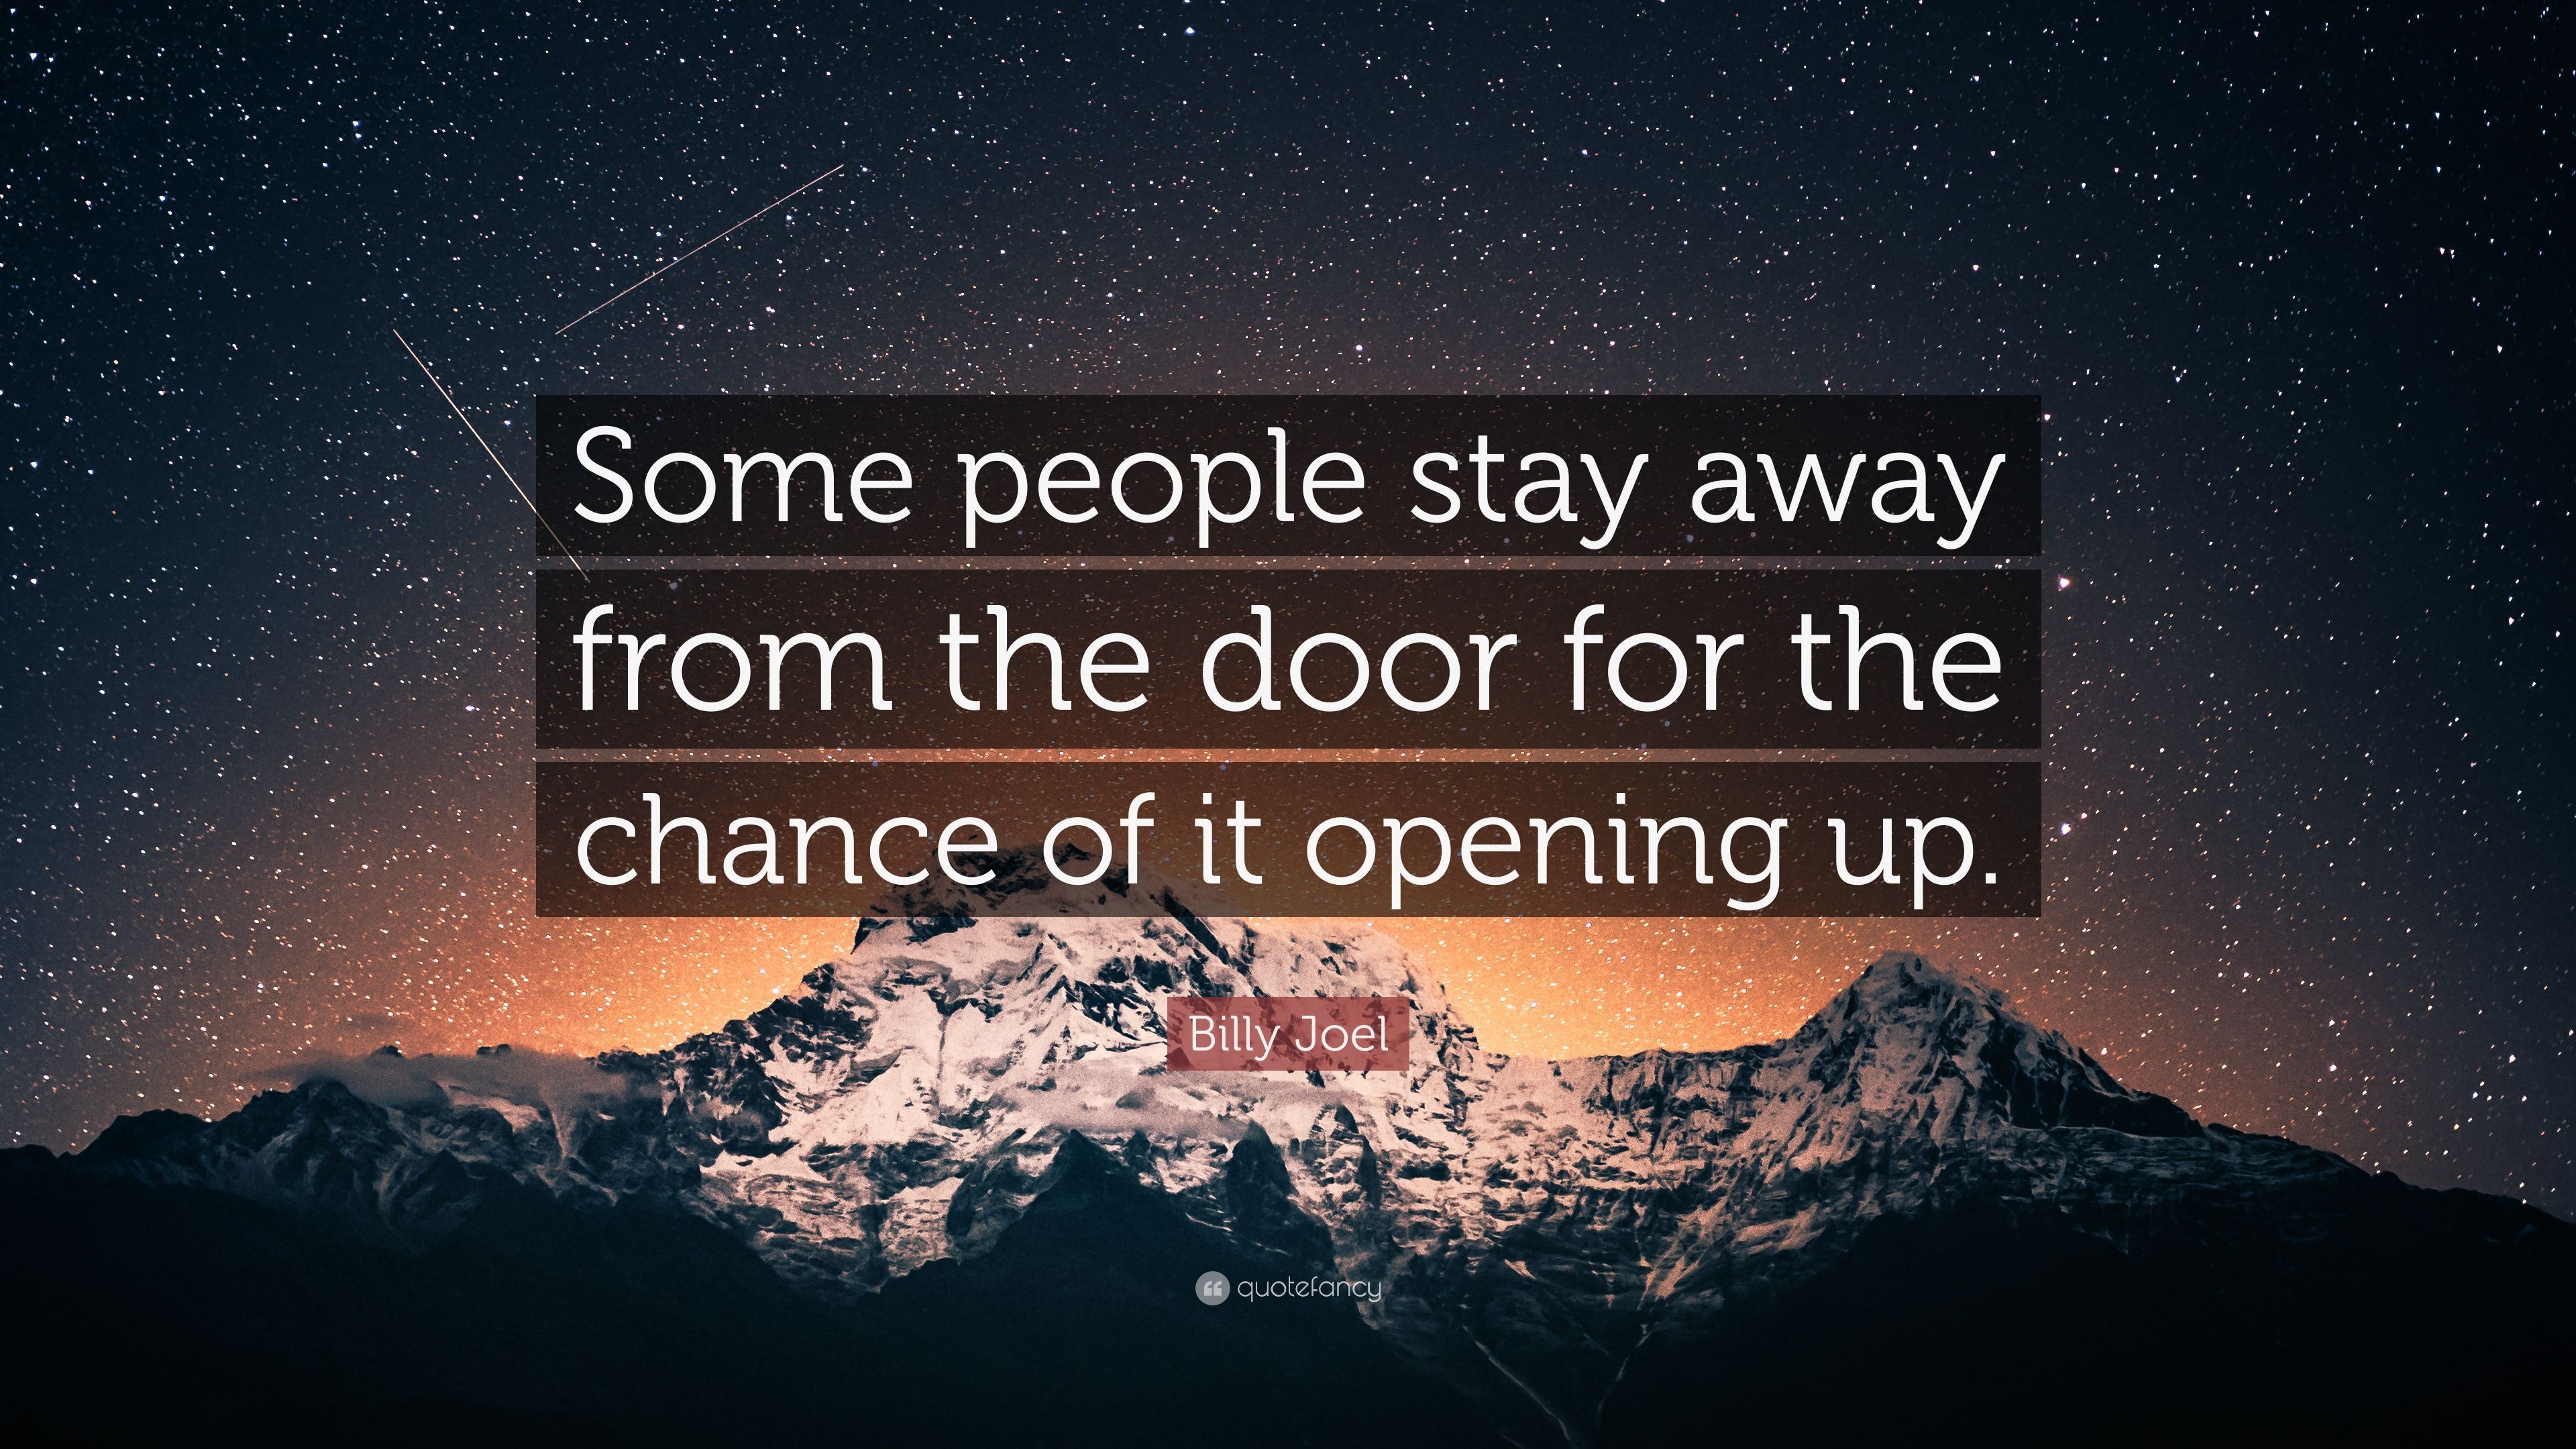 Billy Joel Quote: “Some people stay away from the door for